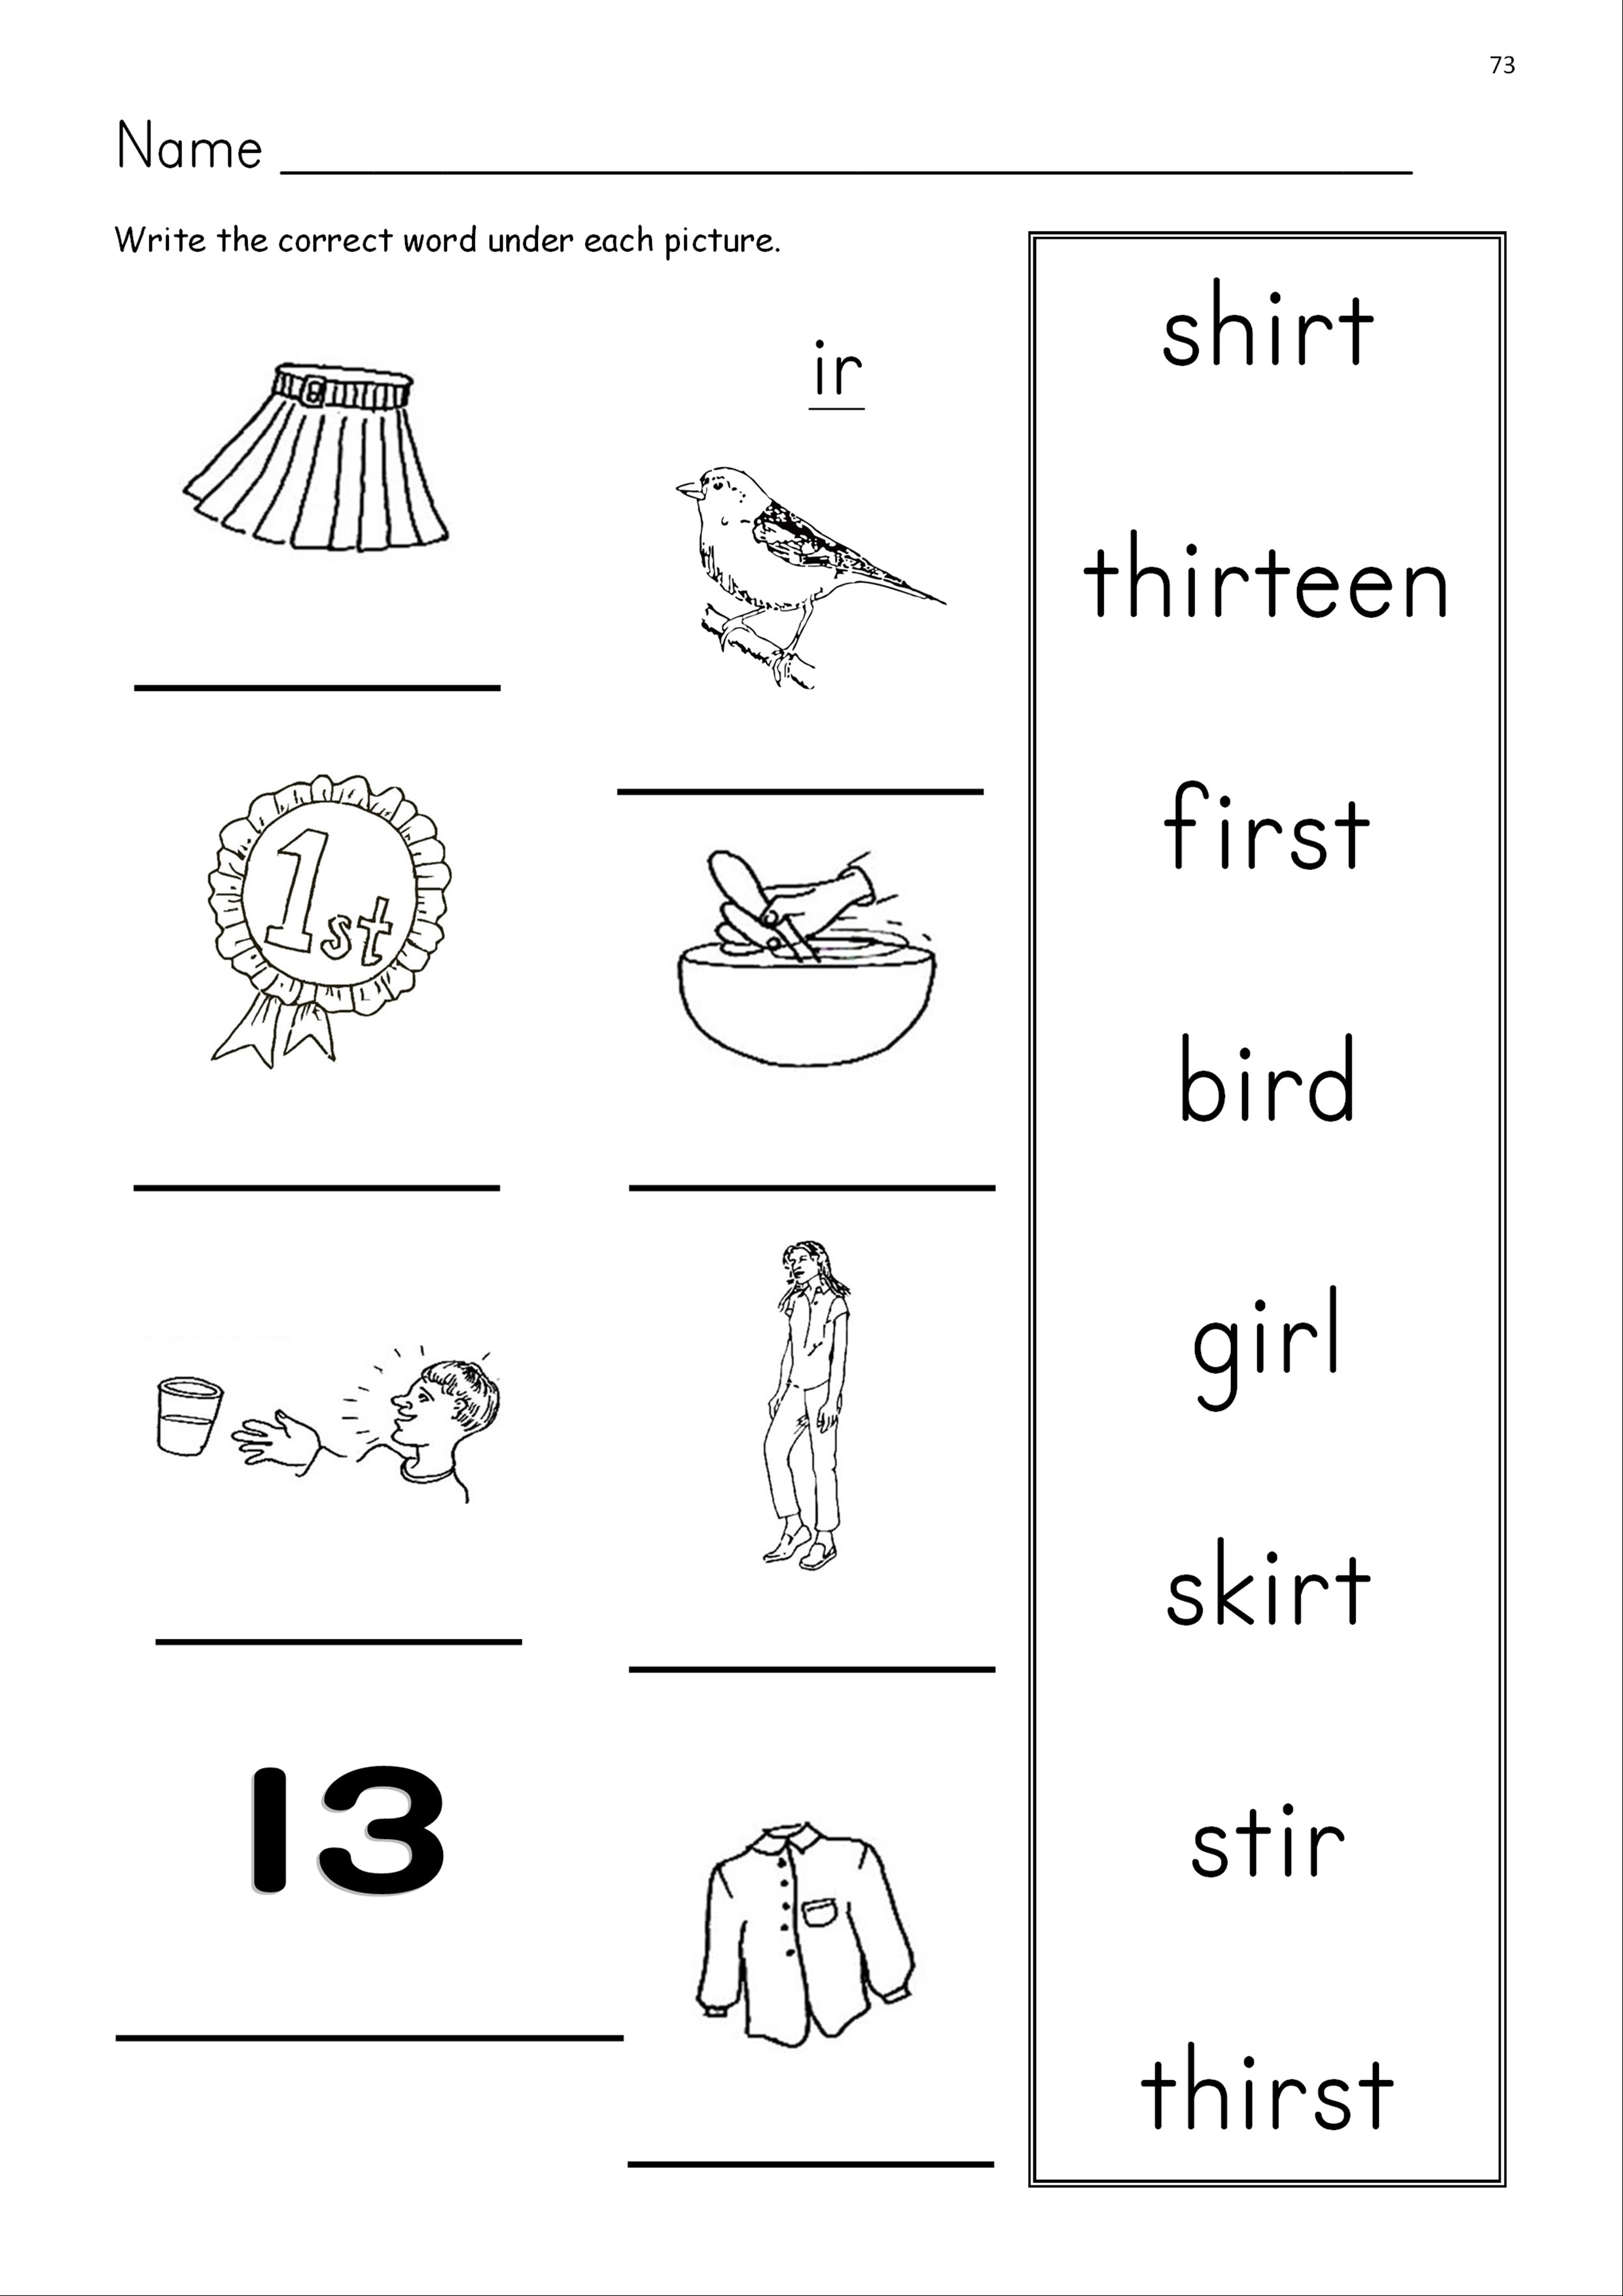 phonics-ir-sound-worksheets-free-download-gmbar-co